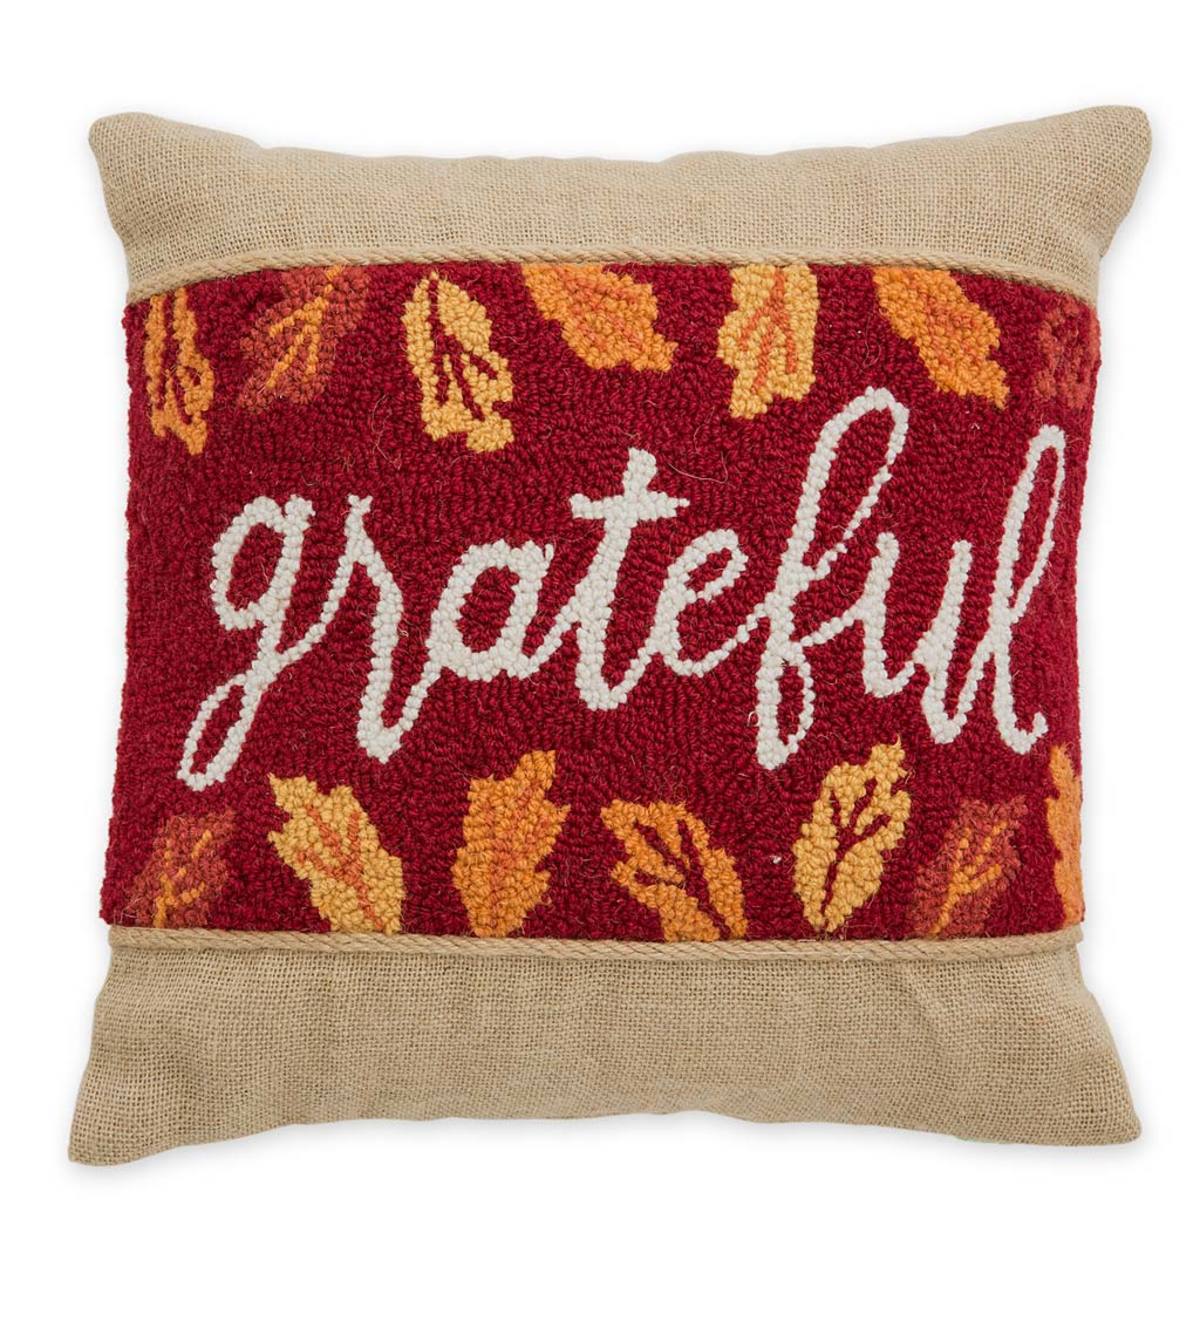 Hooked Wool and Burlap Grateful Throw Pillow